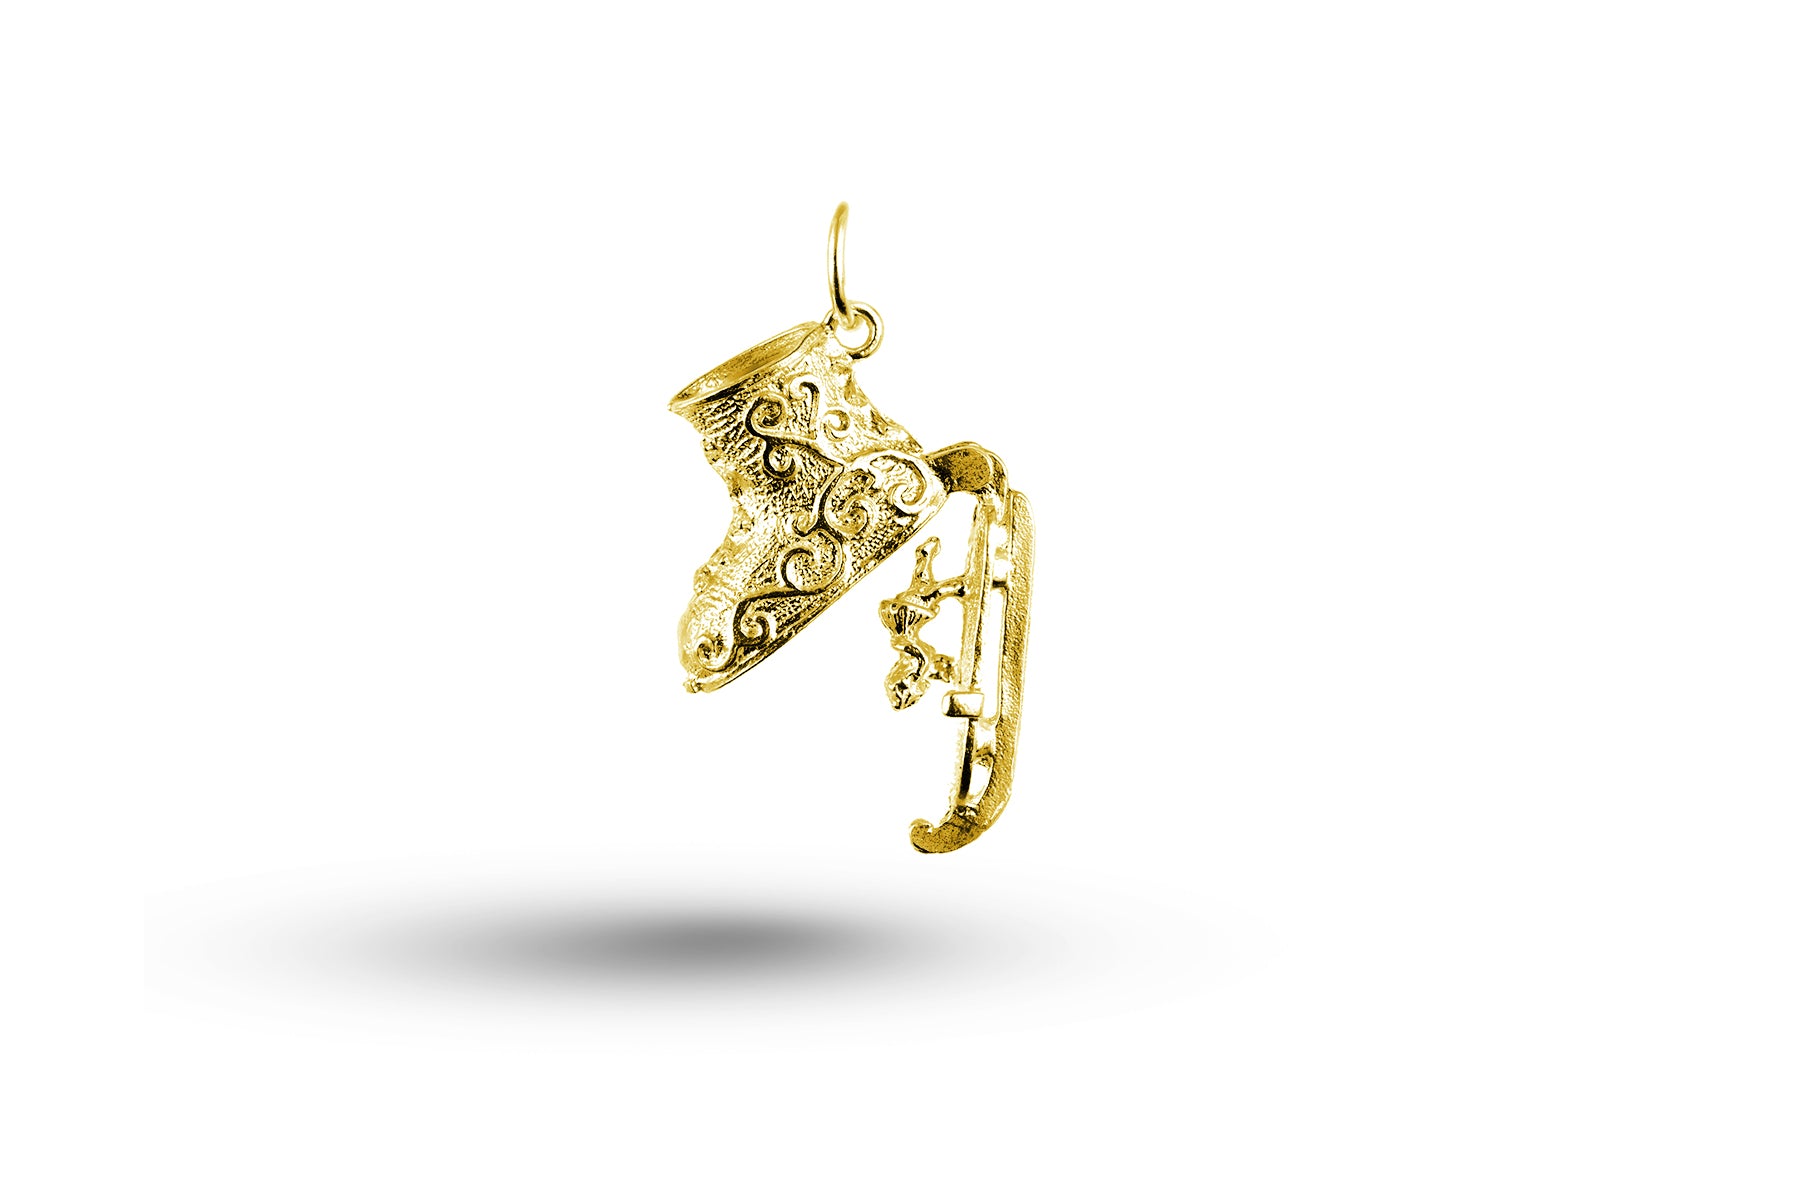 Yellow gold Opening Ice Skate charm.